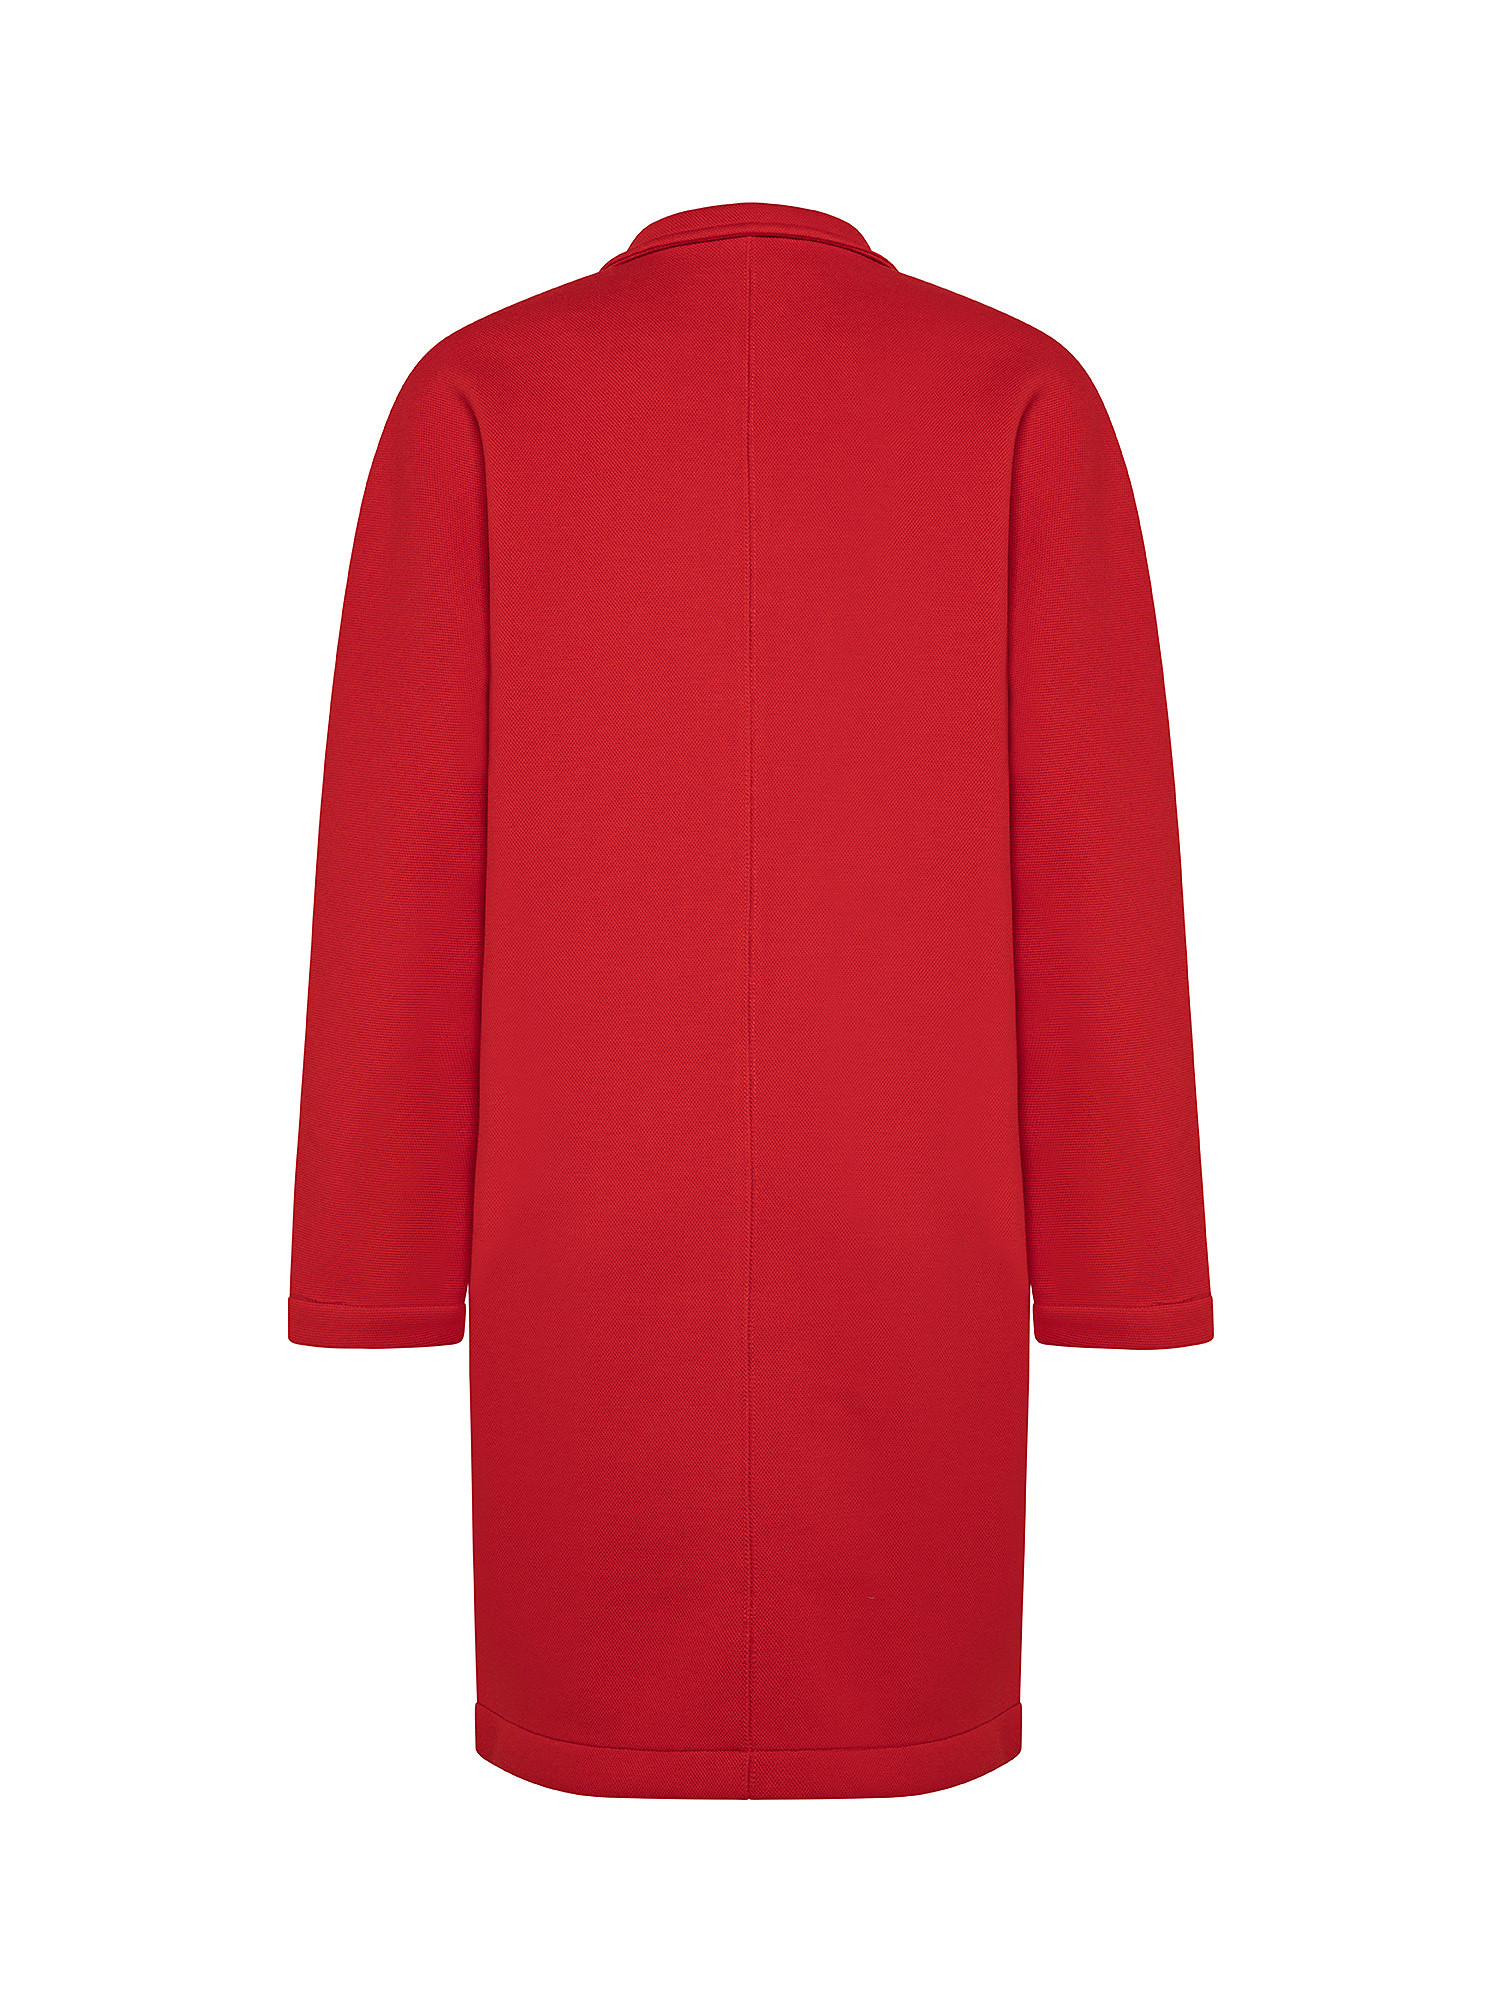 Cappotto oversize sfoderato, Rosso, large image number 1